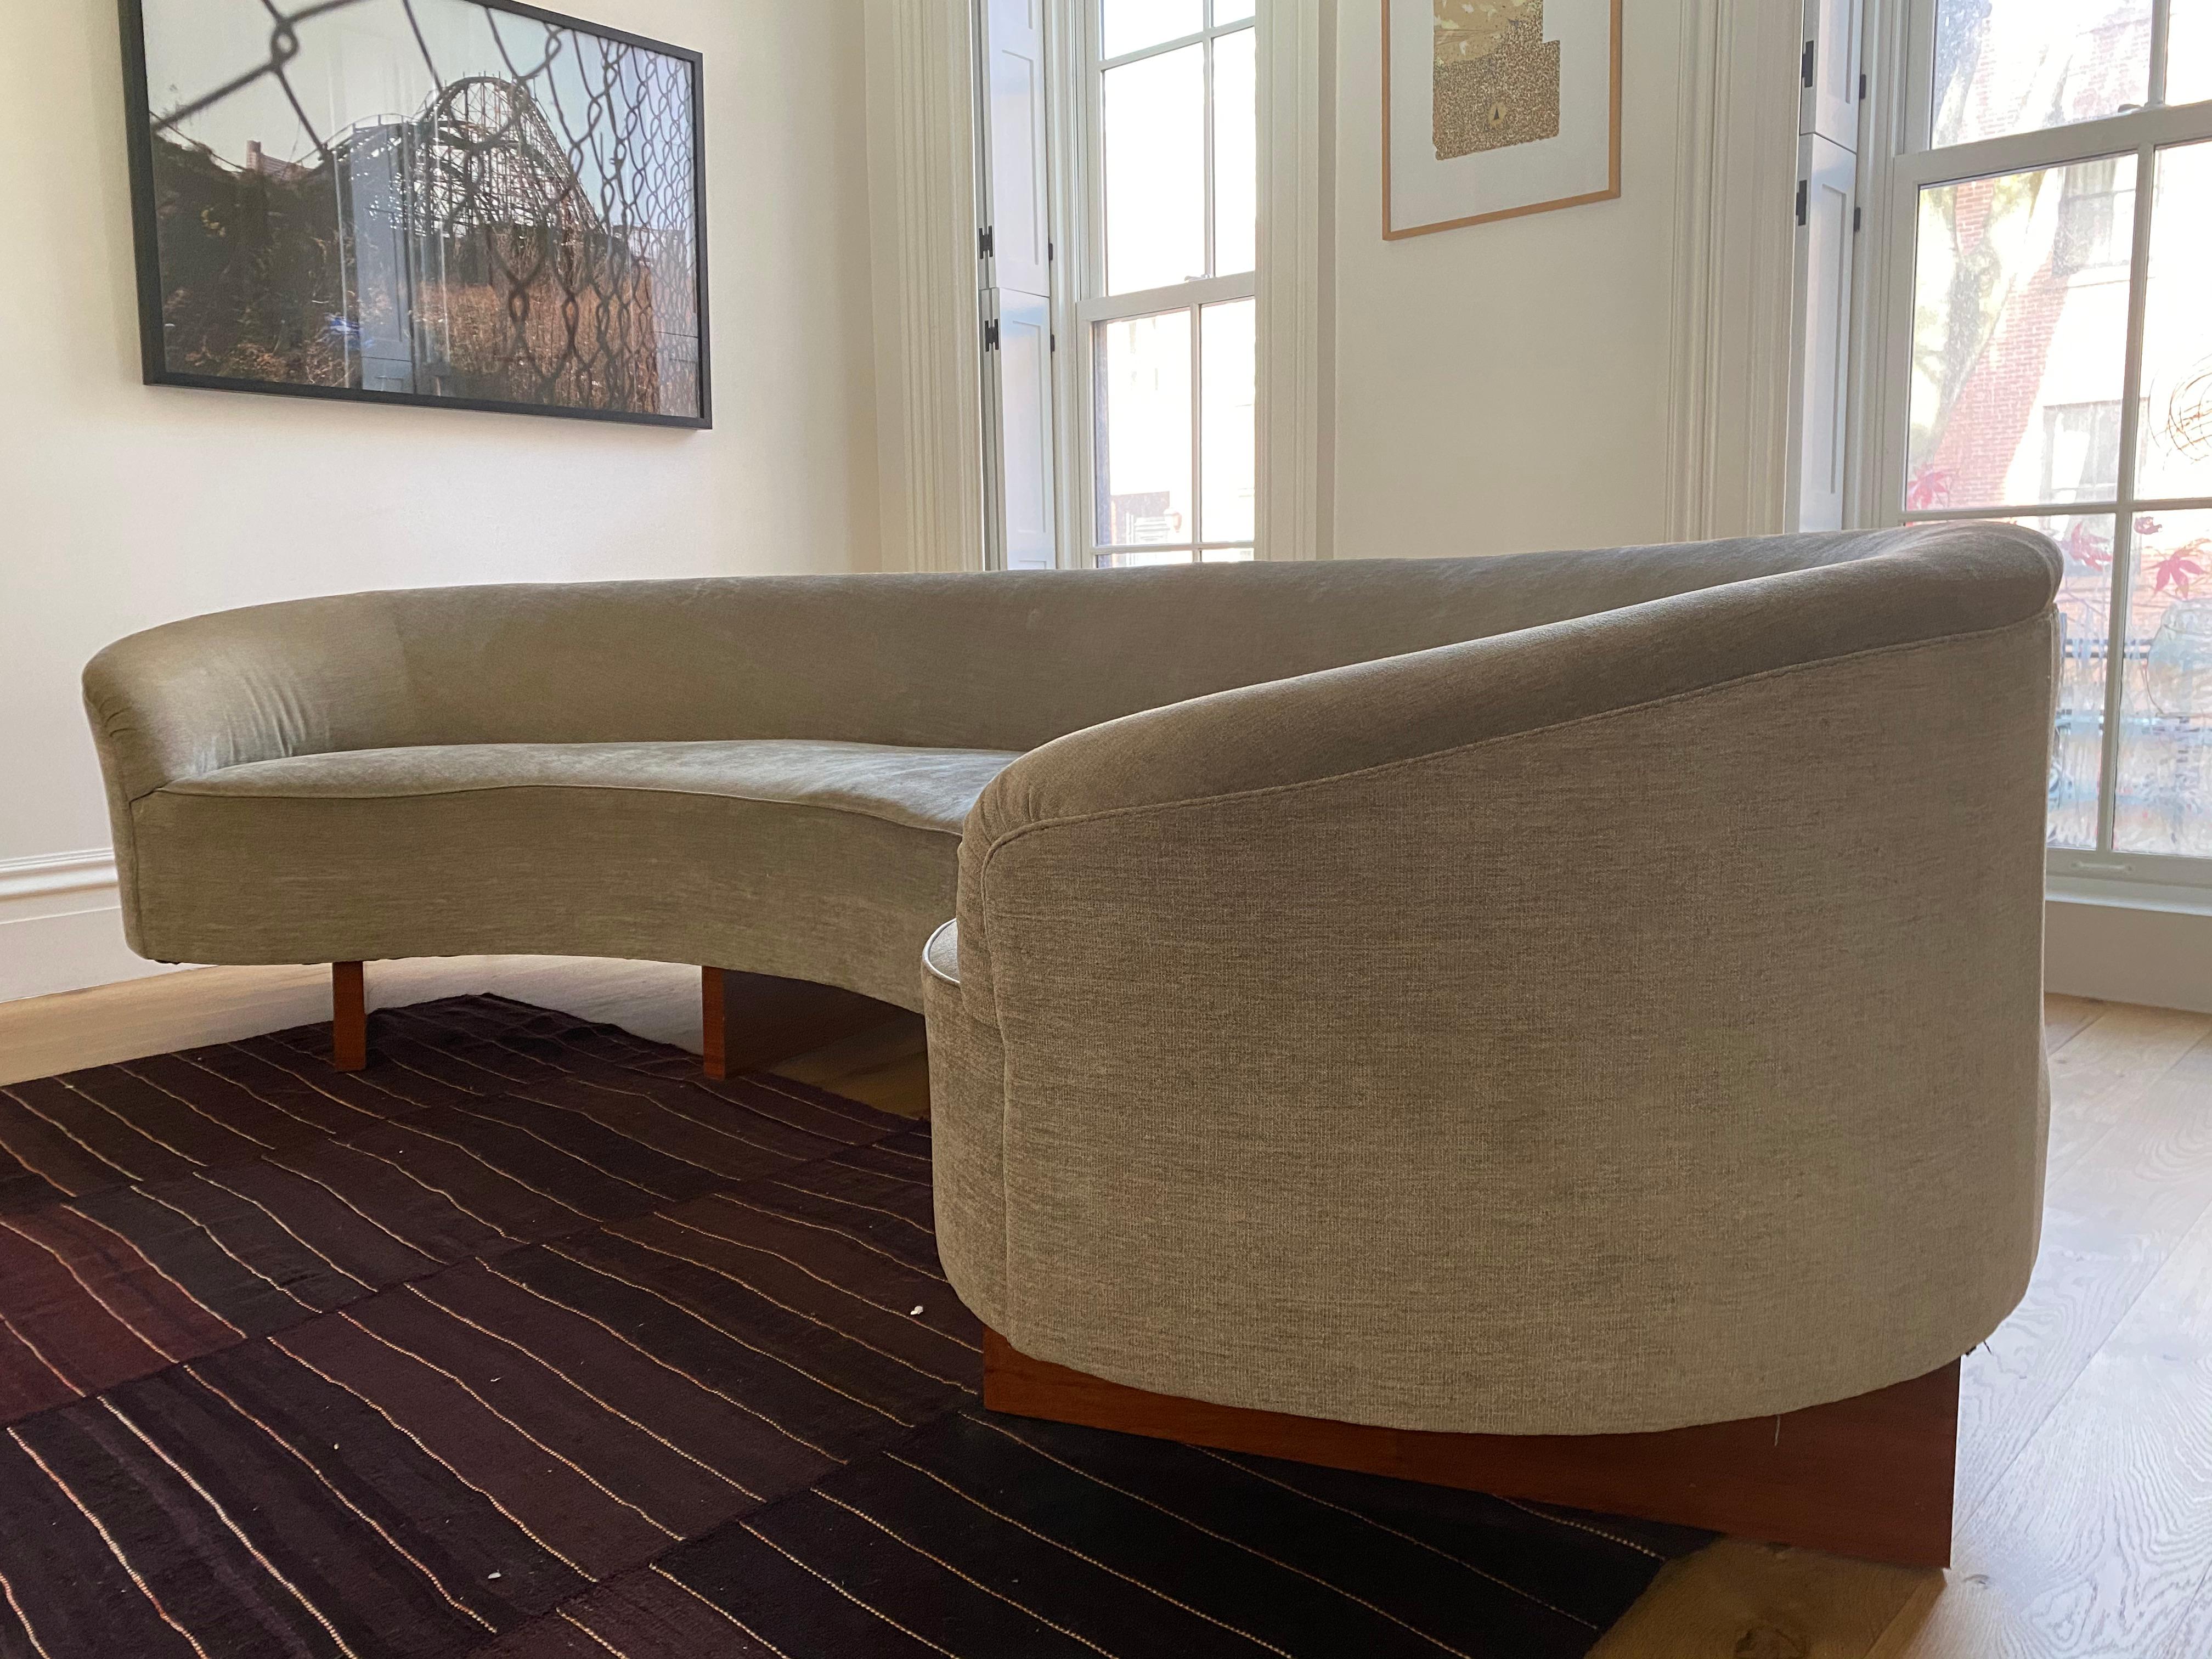 Custom made Sloane sofa (original design by Vladimir Kagan). Upholstered in Zimmer and Rohde chenille by Deangelis upholstery shop in 2015.